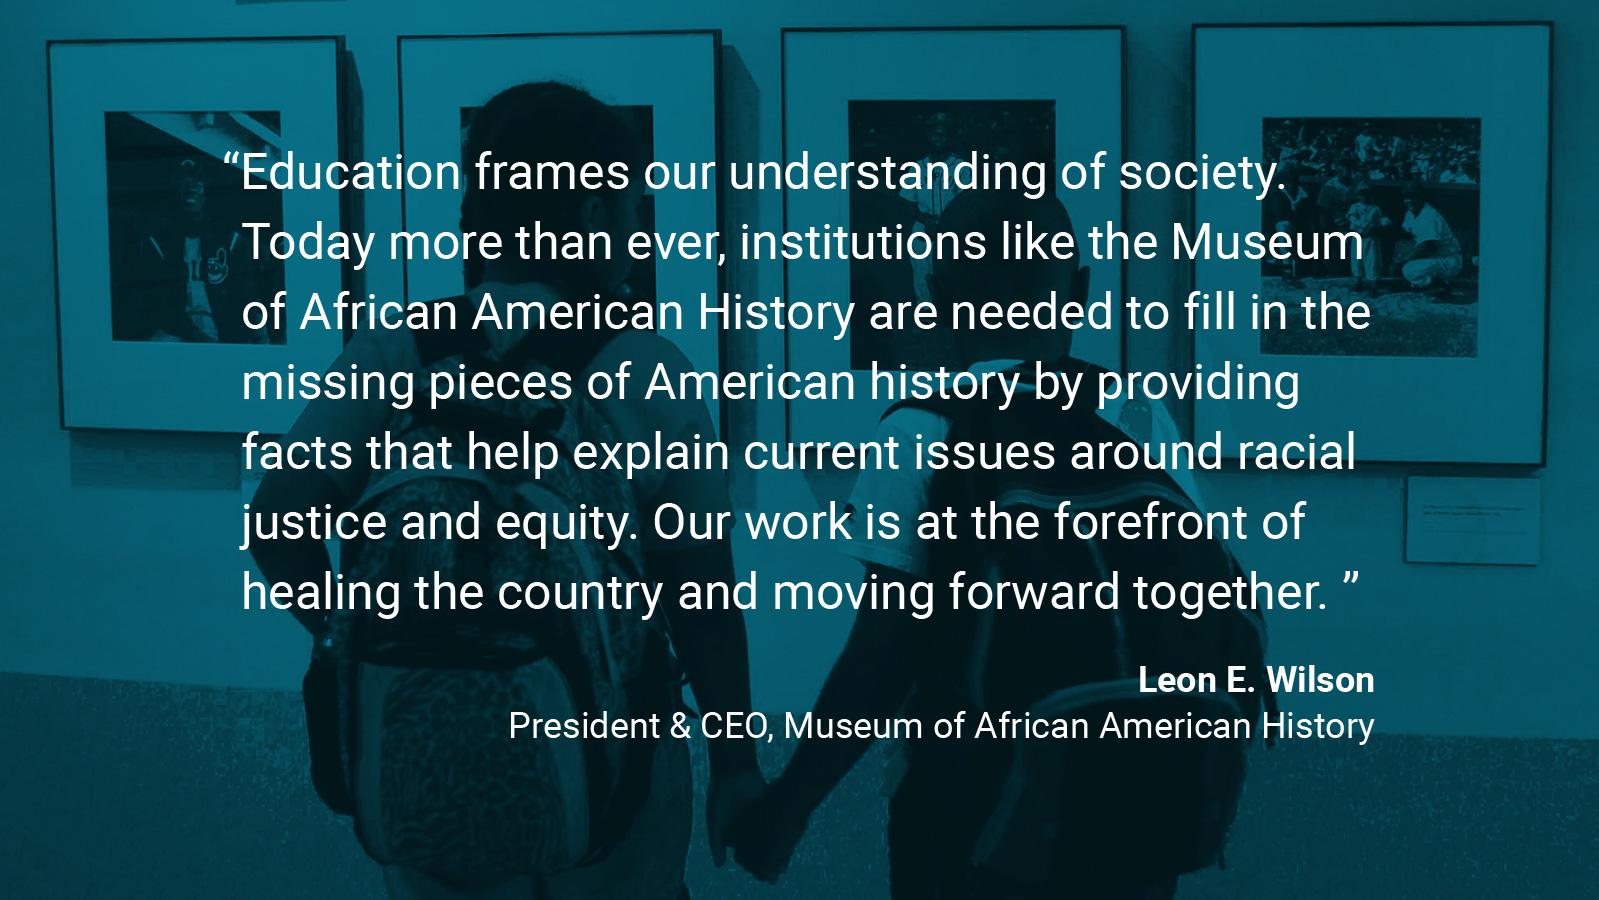 (slide 2 of 4) Museum of African American History Quote by: Leon E. Wilson, President & CEO at The Museum of African American History: "Education frames our understanding of society. Today more than ever, institutions like the Museum of African American History are needed to fill in the missing pieces of American history by providing facts that help explain current issues around racial justice and equity. Our work is at the forefront of healing the country and moving forward together. . 